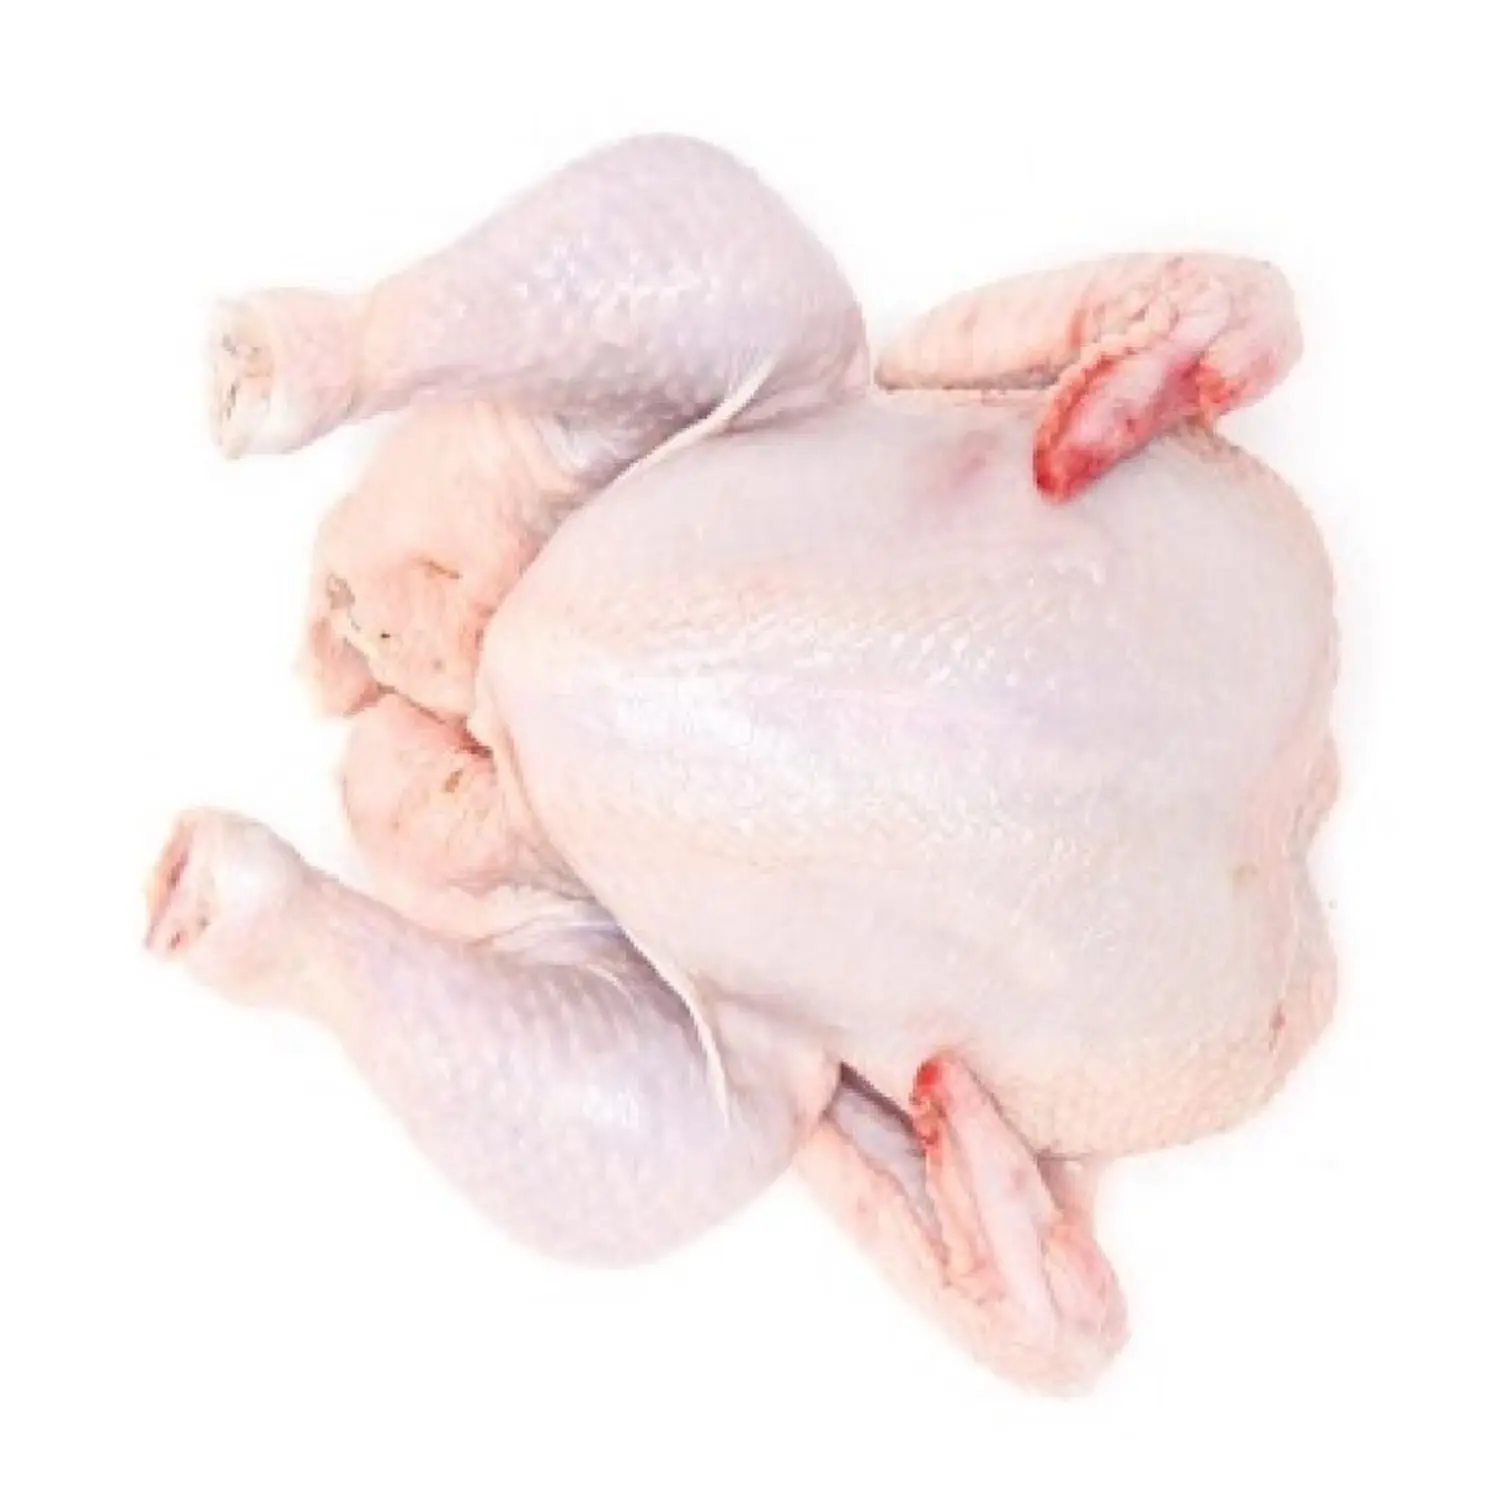 High Quality Halal Fresh Frozen Bone in Whole Chicken at Wholesale Price Direct From Canada Supplier